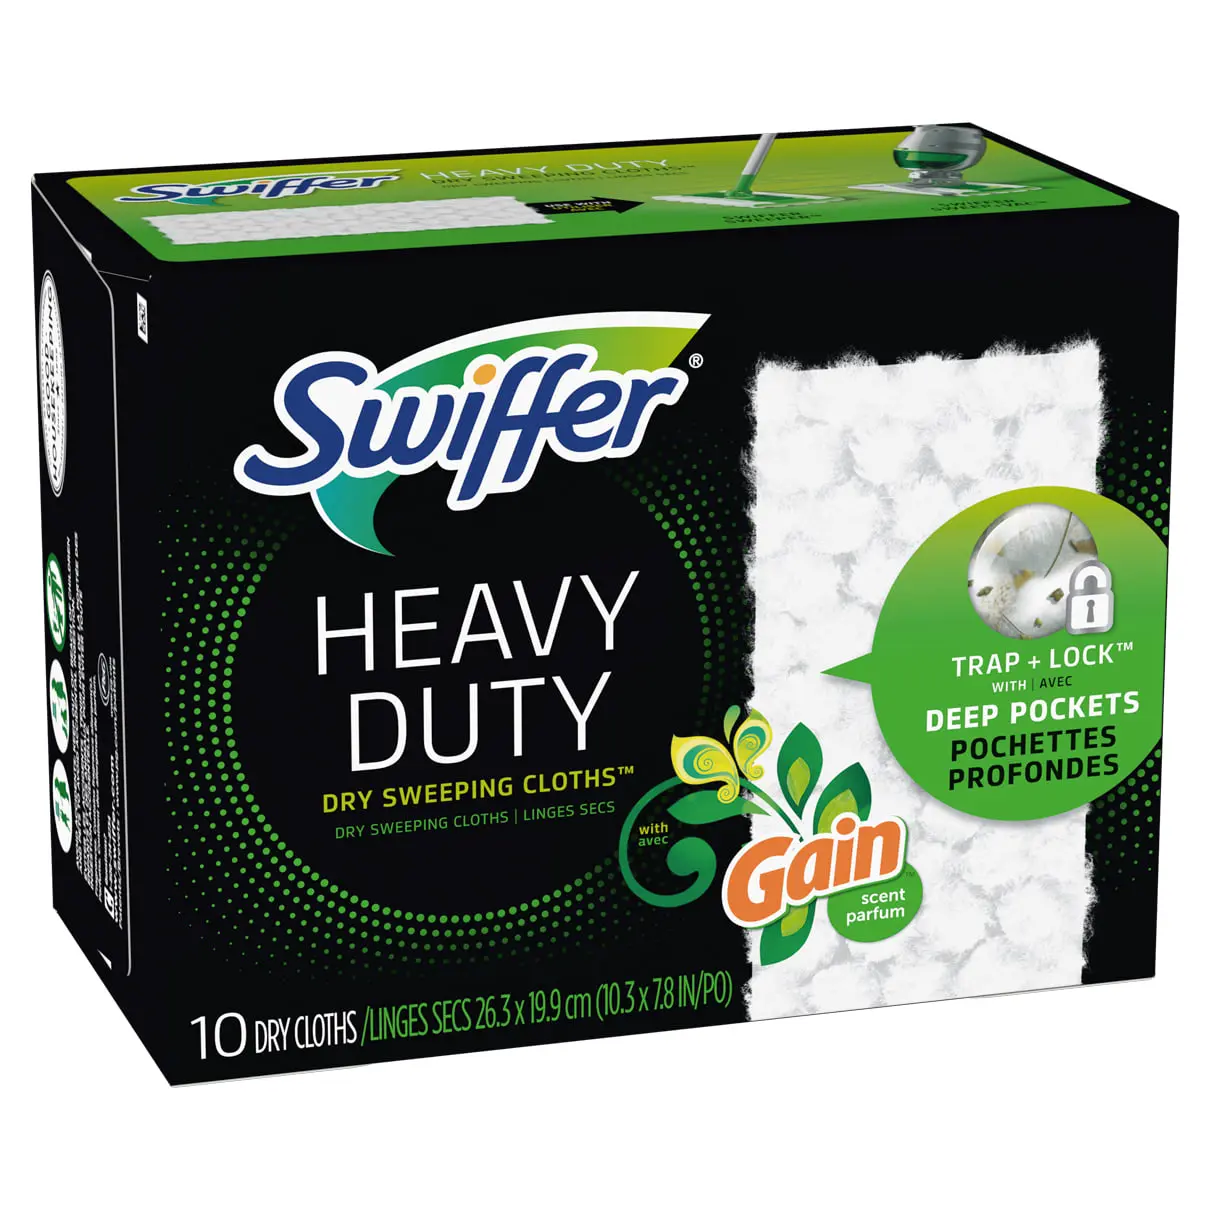 Swiffer® Sweeper™ Heavy Duty Multi-Surface Dry Cloth Refills for Floor Sweeping and Cleaning, Gain scent